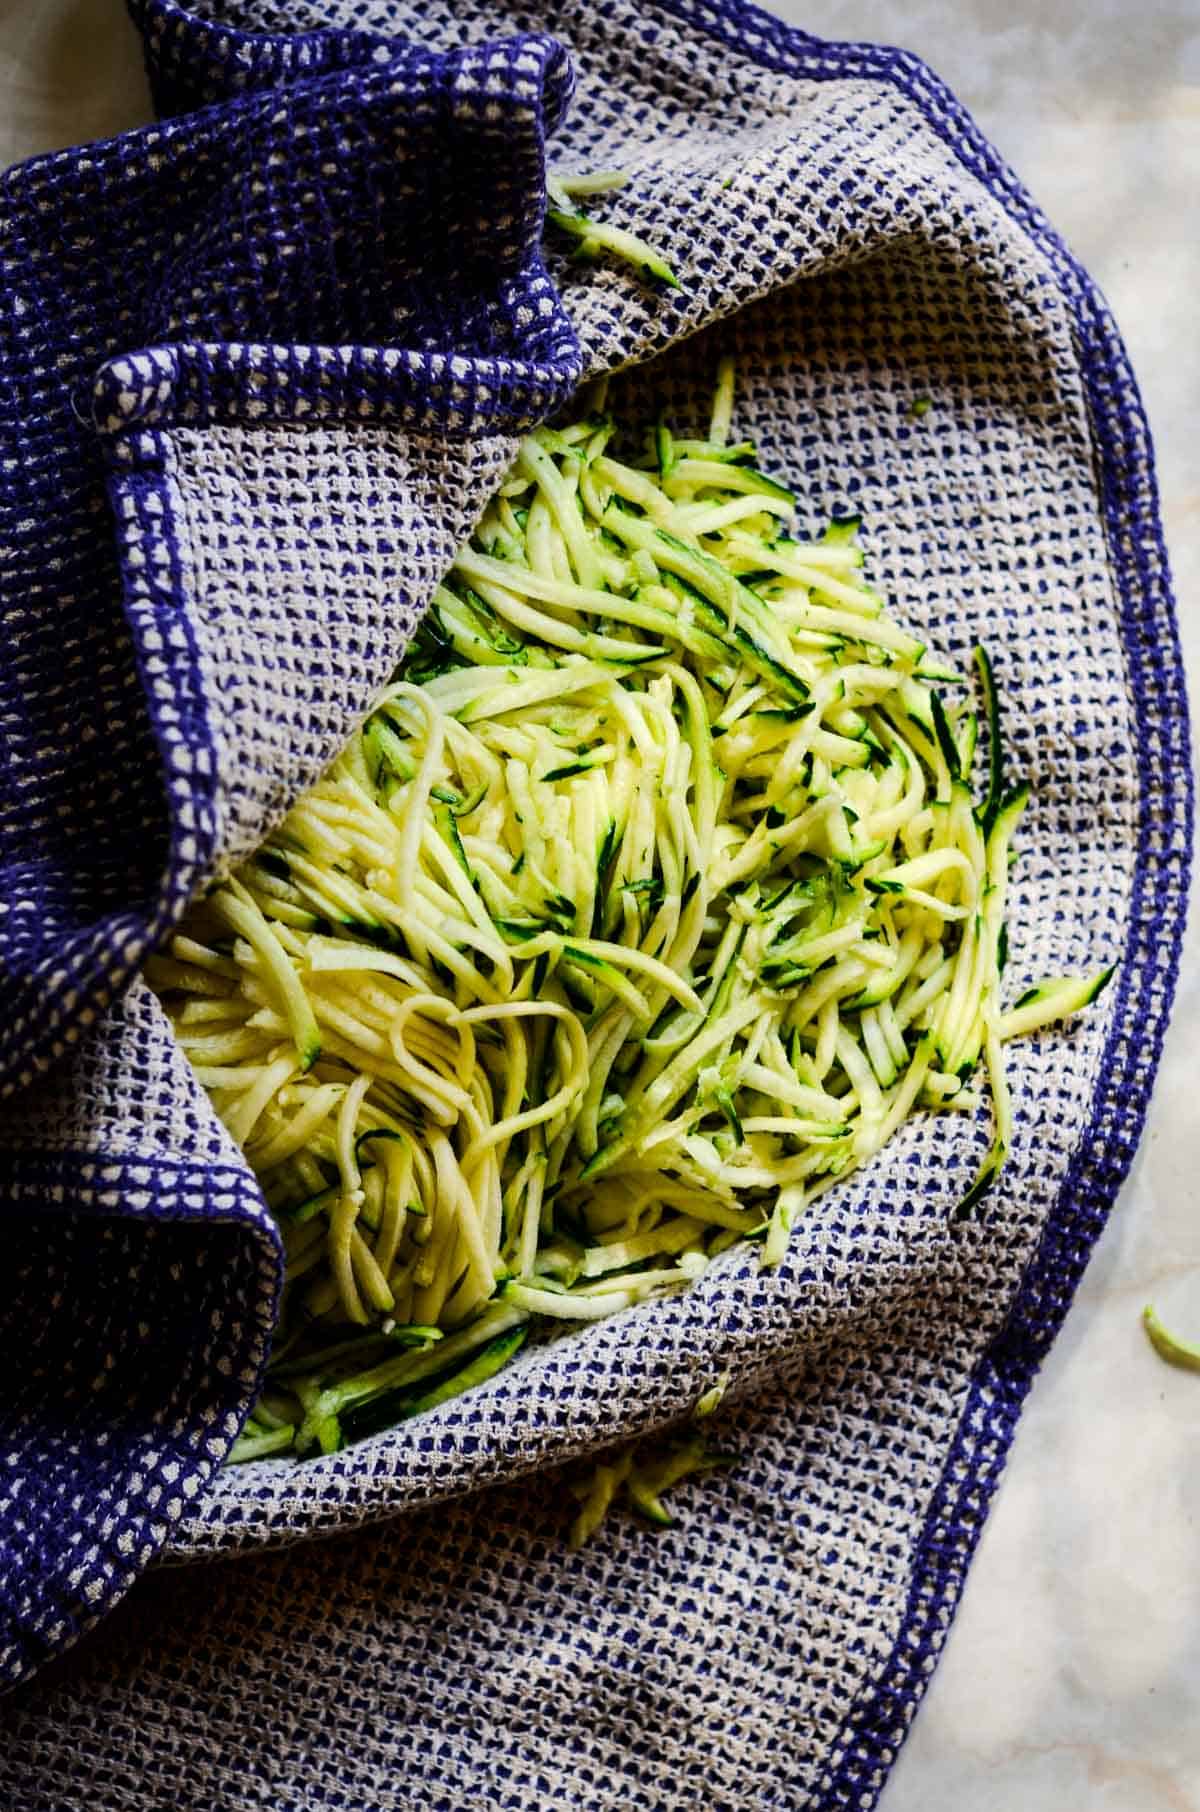 Shredded zucchini in a blue tea towel being squeezed out.